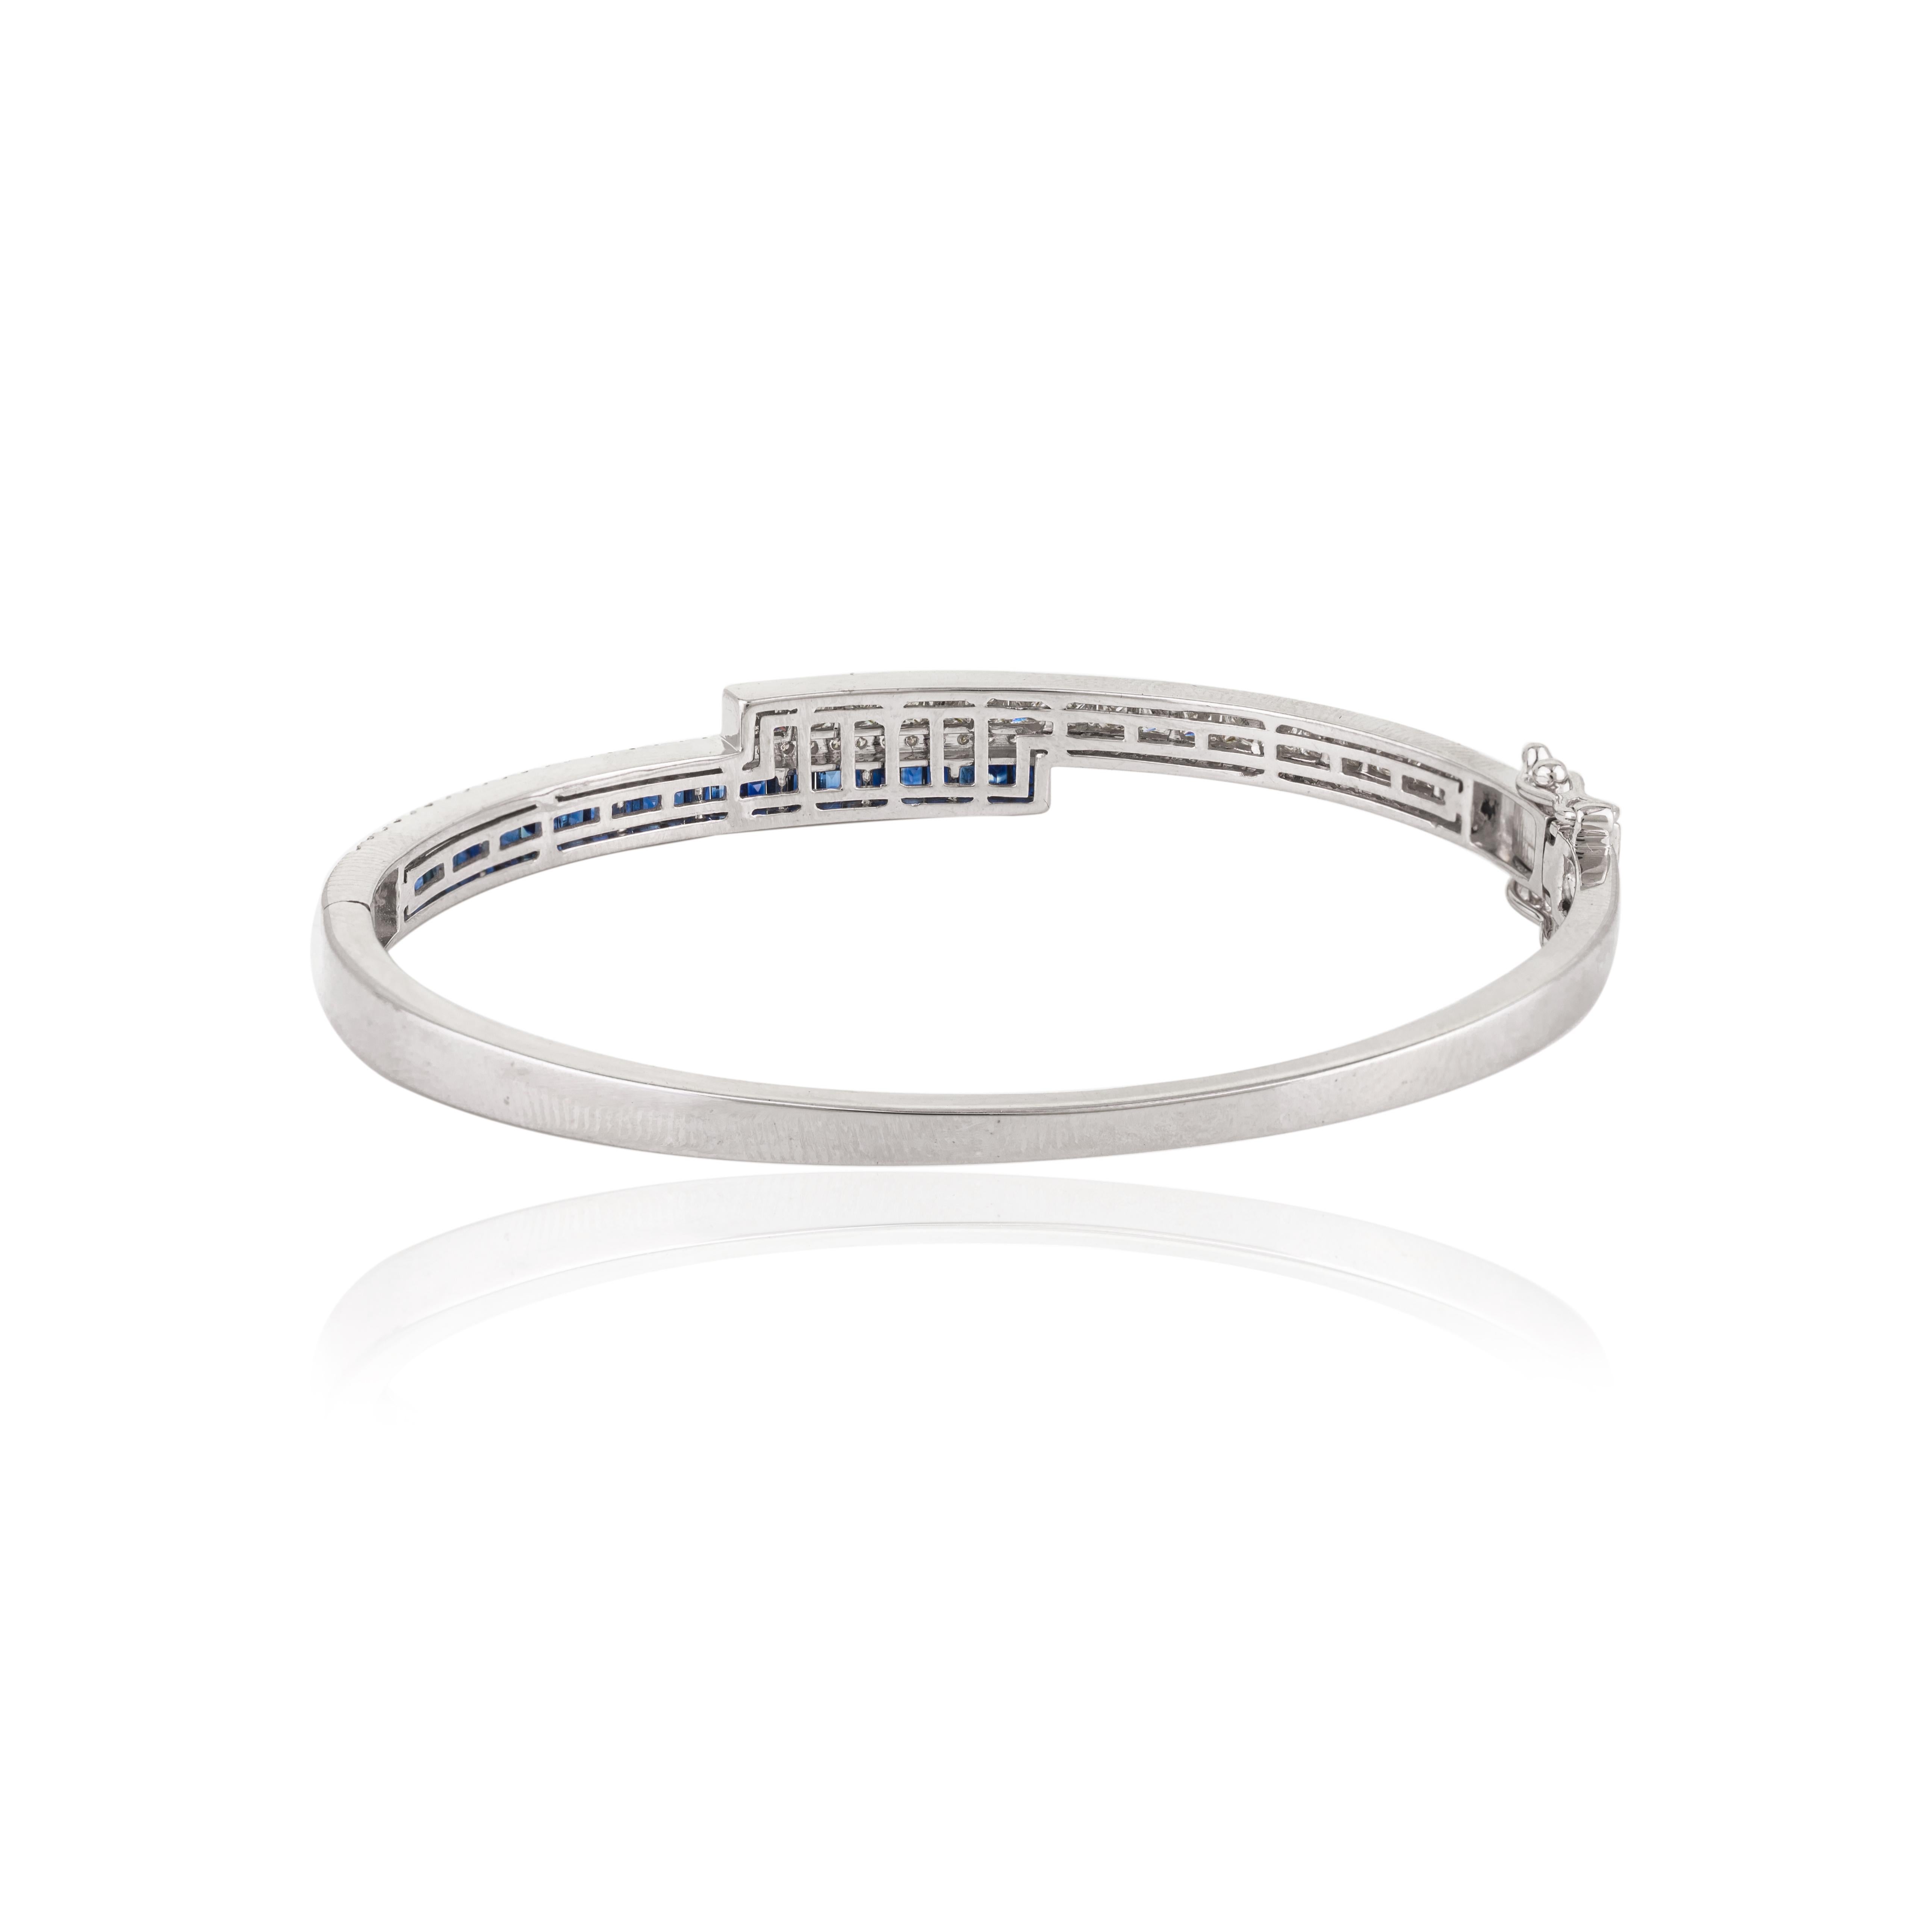 Brilliant Diamond and Blue Sapphire Bangle Bracelet in 18k Solid White Gold In New Condition For Sale In Houston, TX